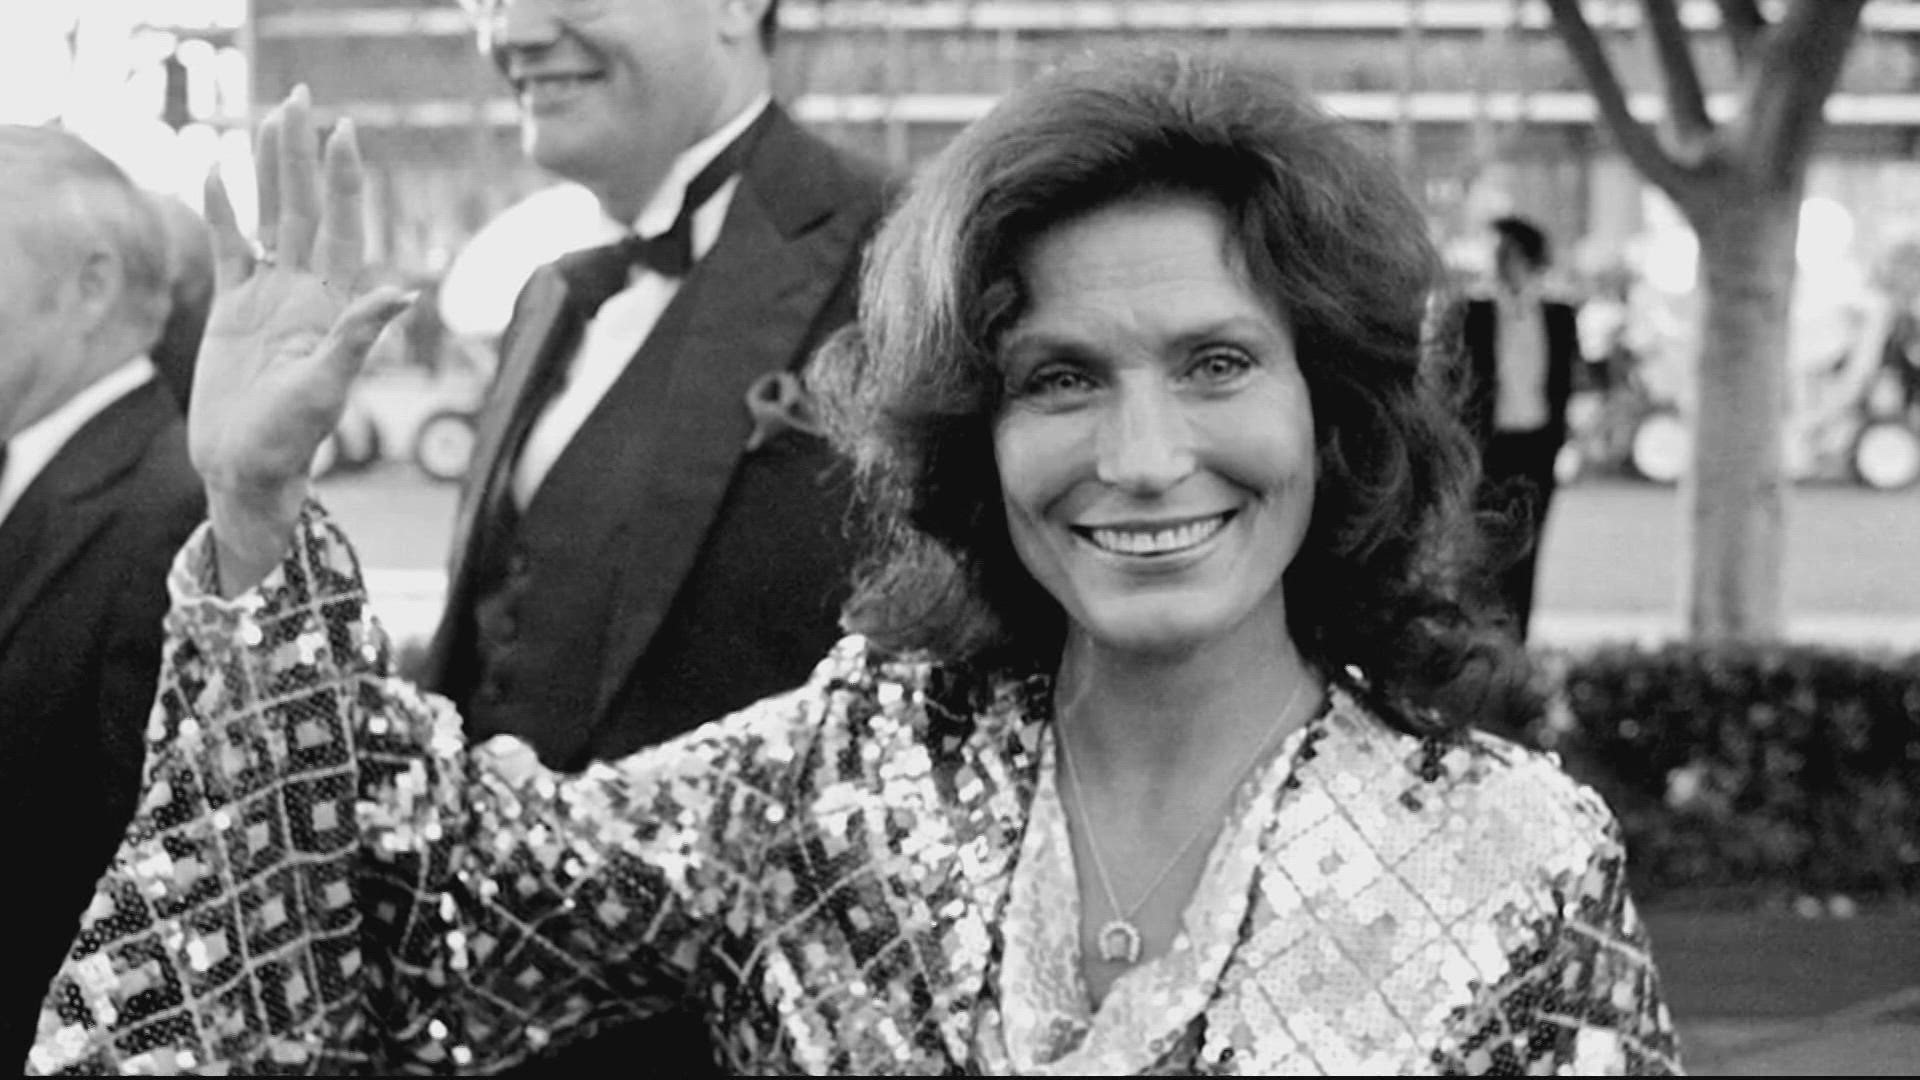 The world of country music has lost a legend. Loretta Lynn, the Coal Miner's Daughter herself, has died at the age of 90.